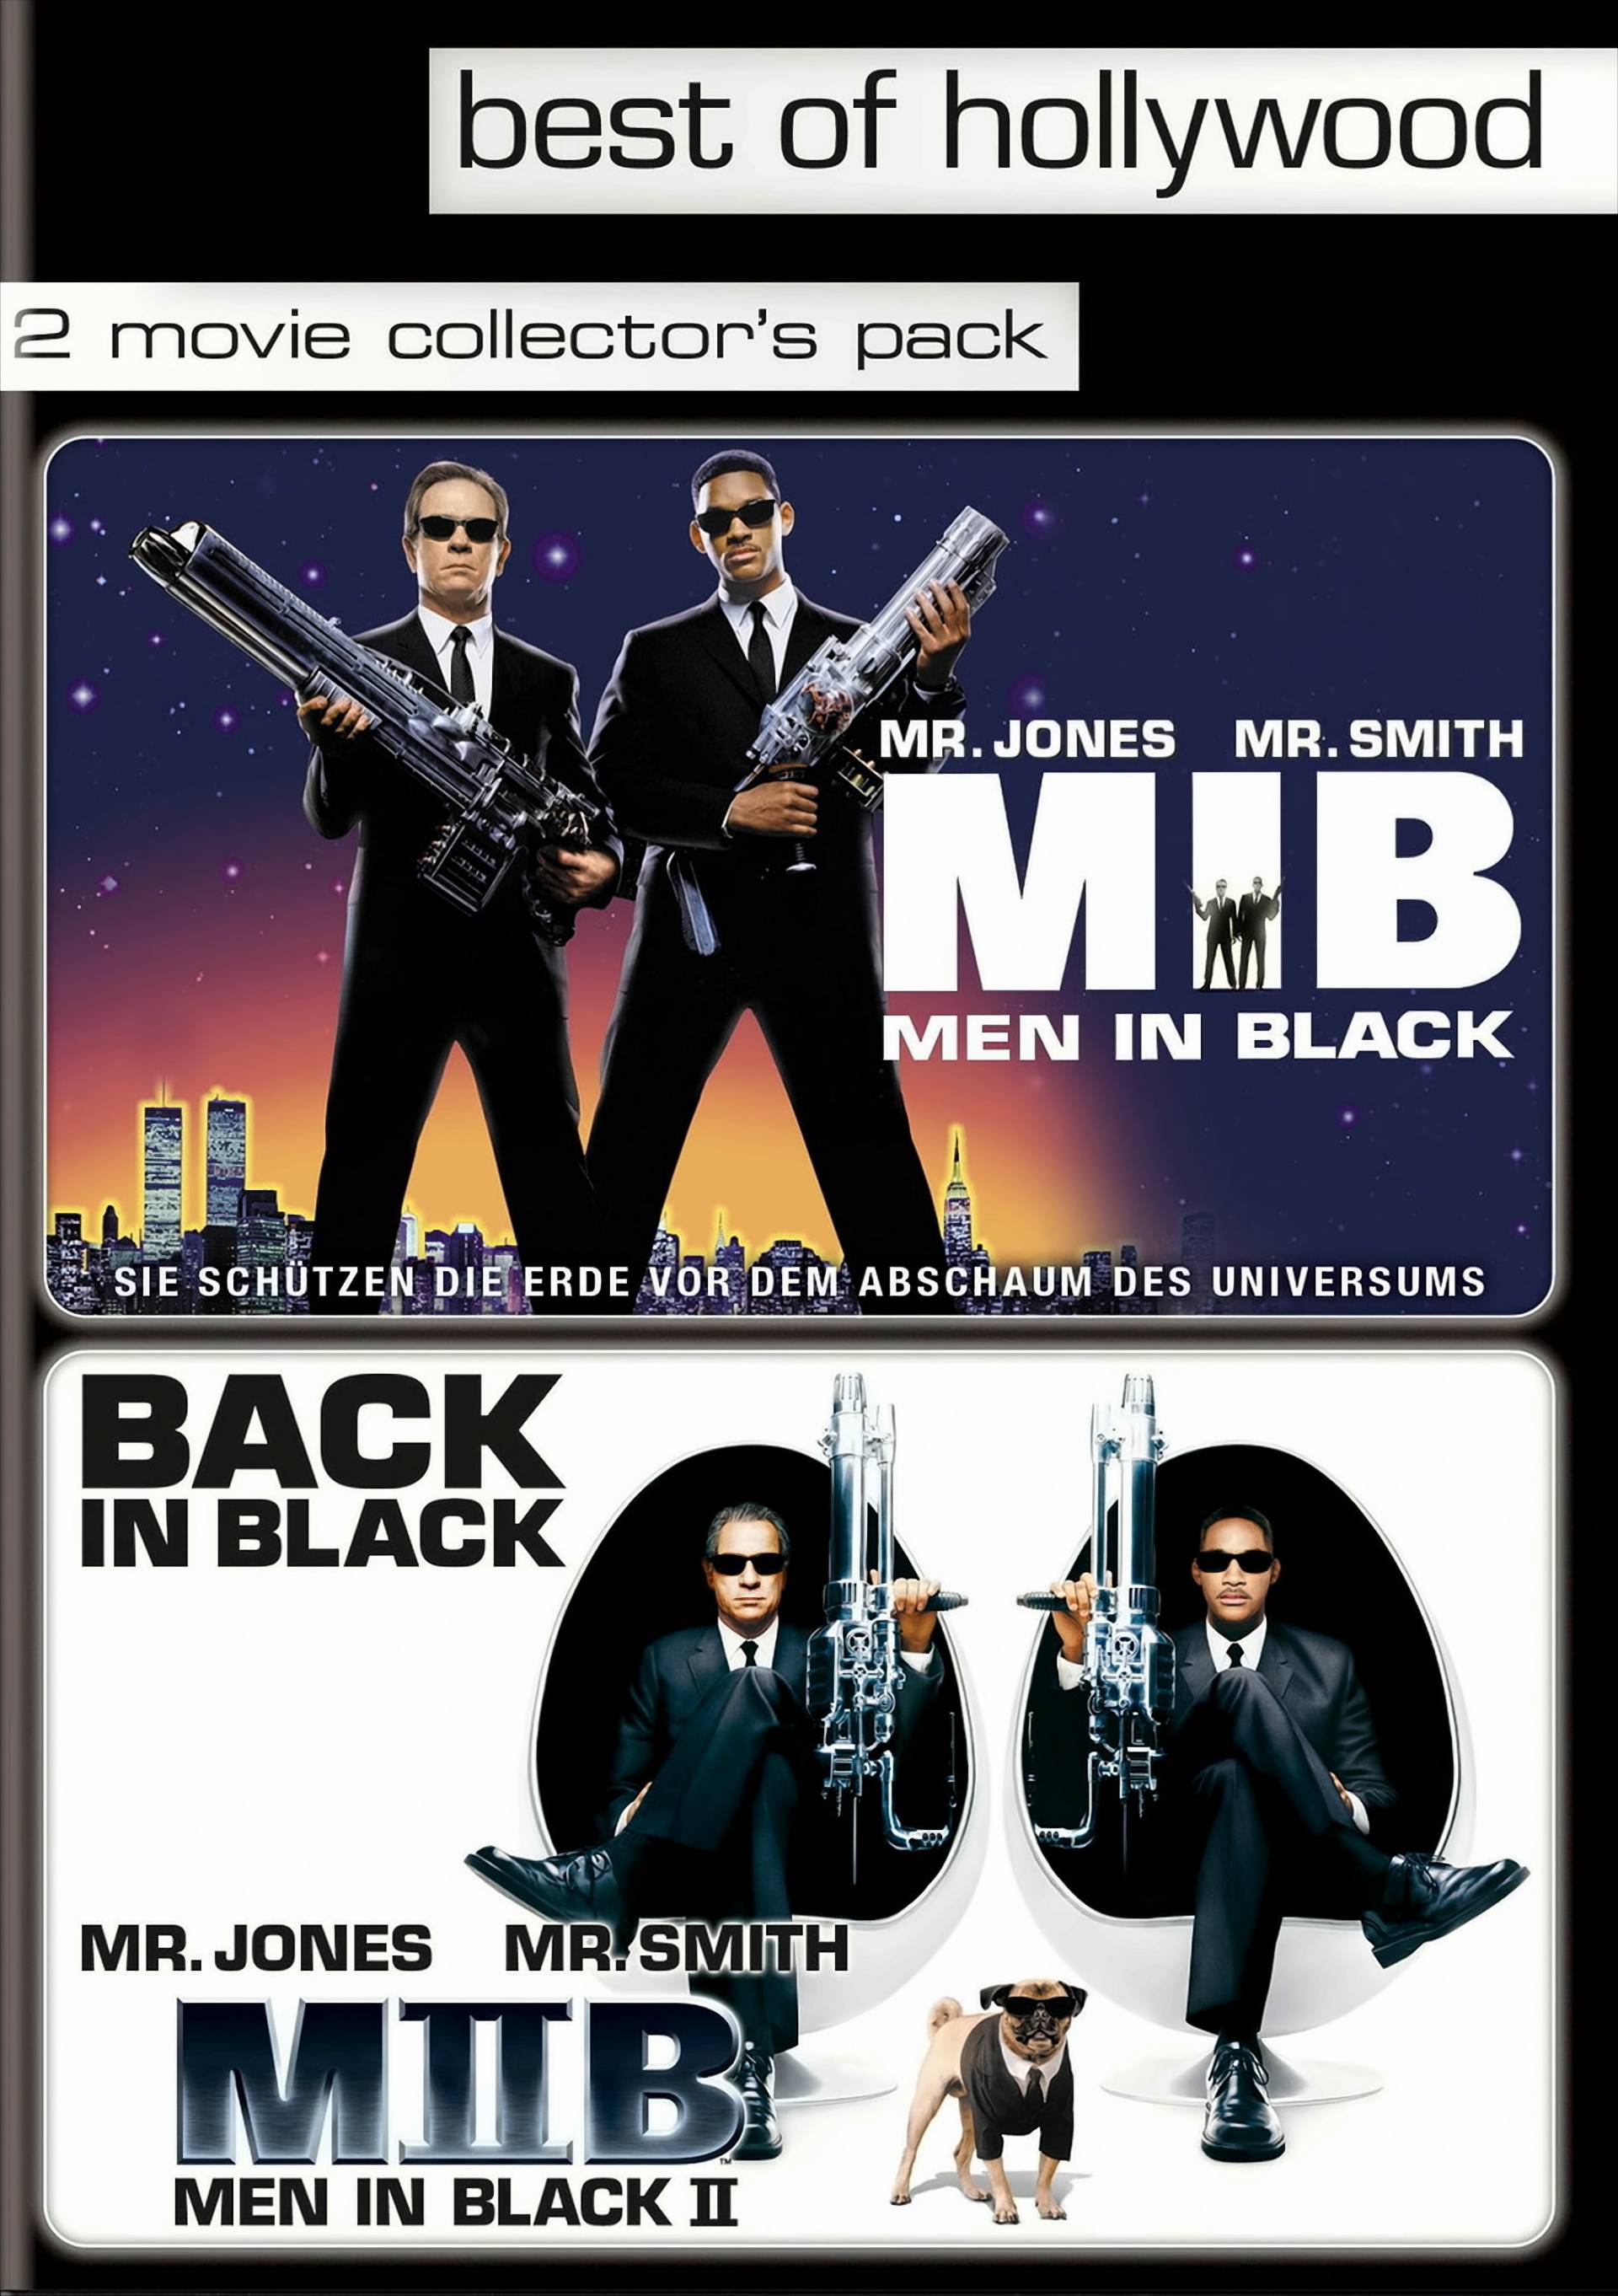 Best of Hollywood - 2 Movie Collector's Pack: Men in Black, C.E. / Men in Black II (3 DVDs) von Sony Pictures